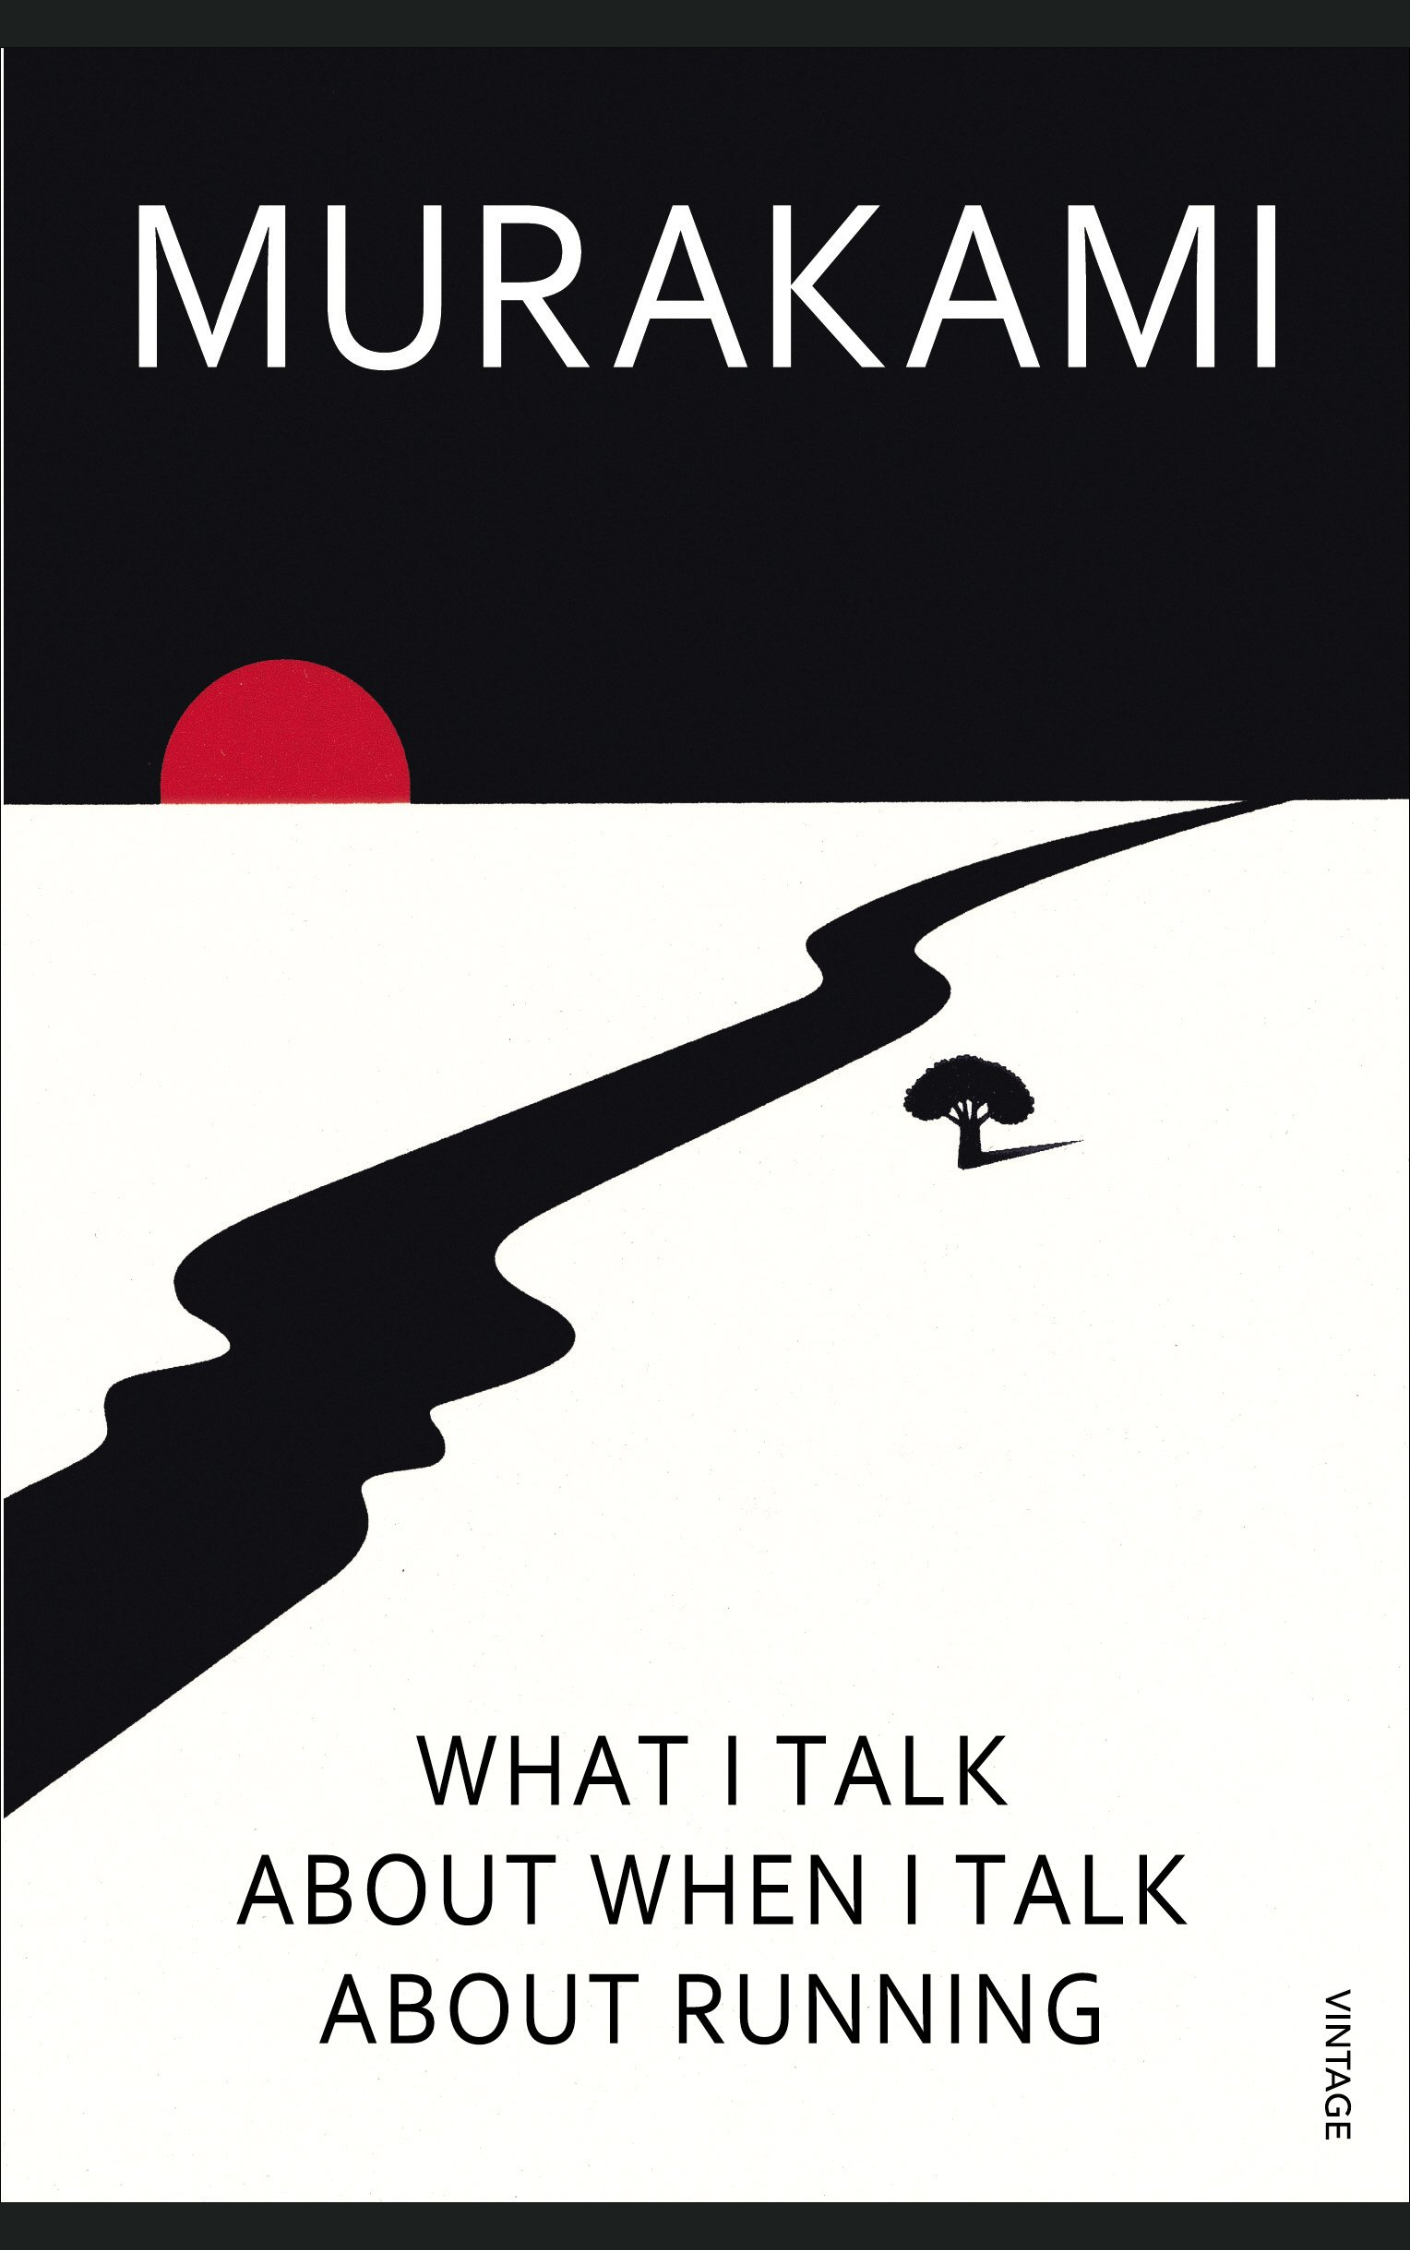 WHAT I TALK ABOUT WHEN I TALK ABOUT RUNNING by HARUKI MURAKAMI